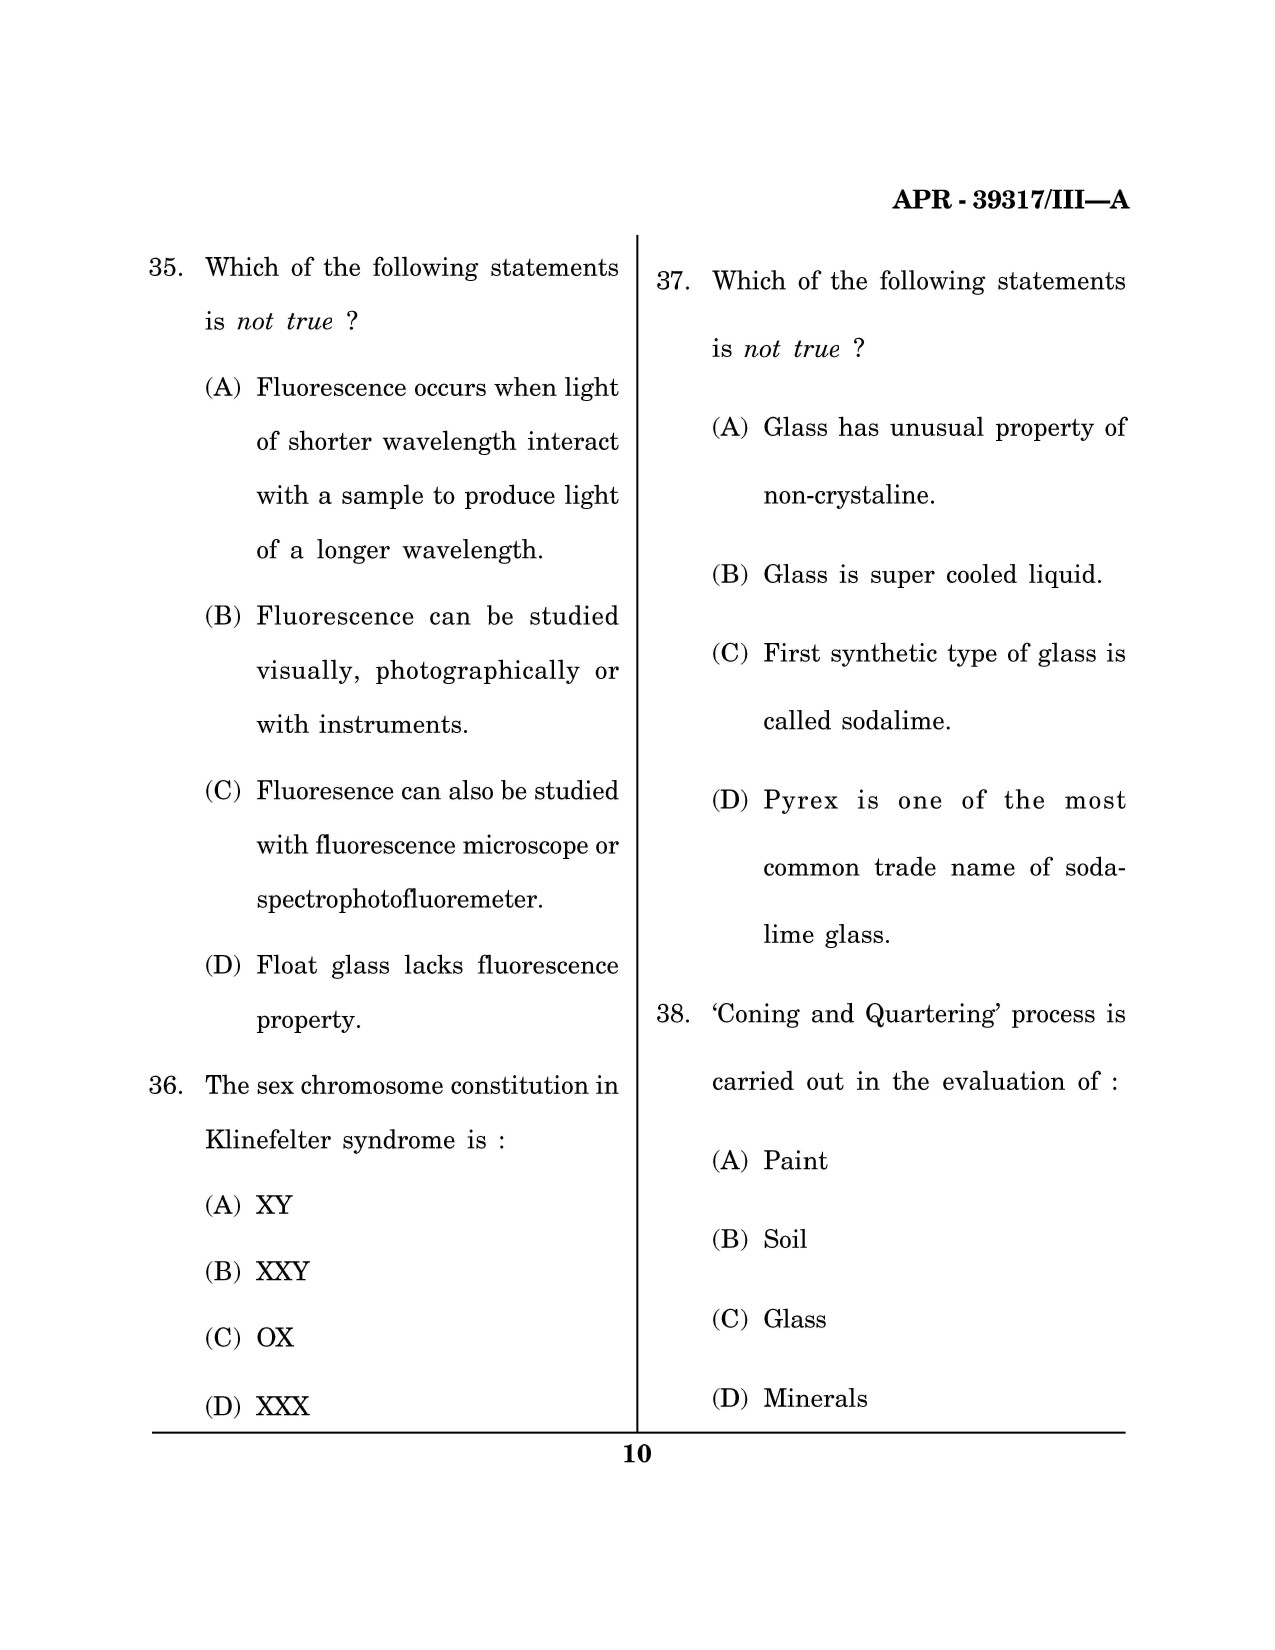 Maharashtra SET Forensic Science Question Paper III April 2017 9